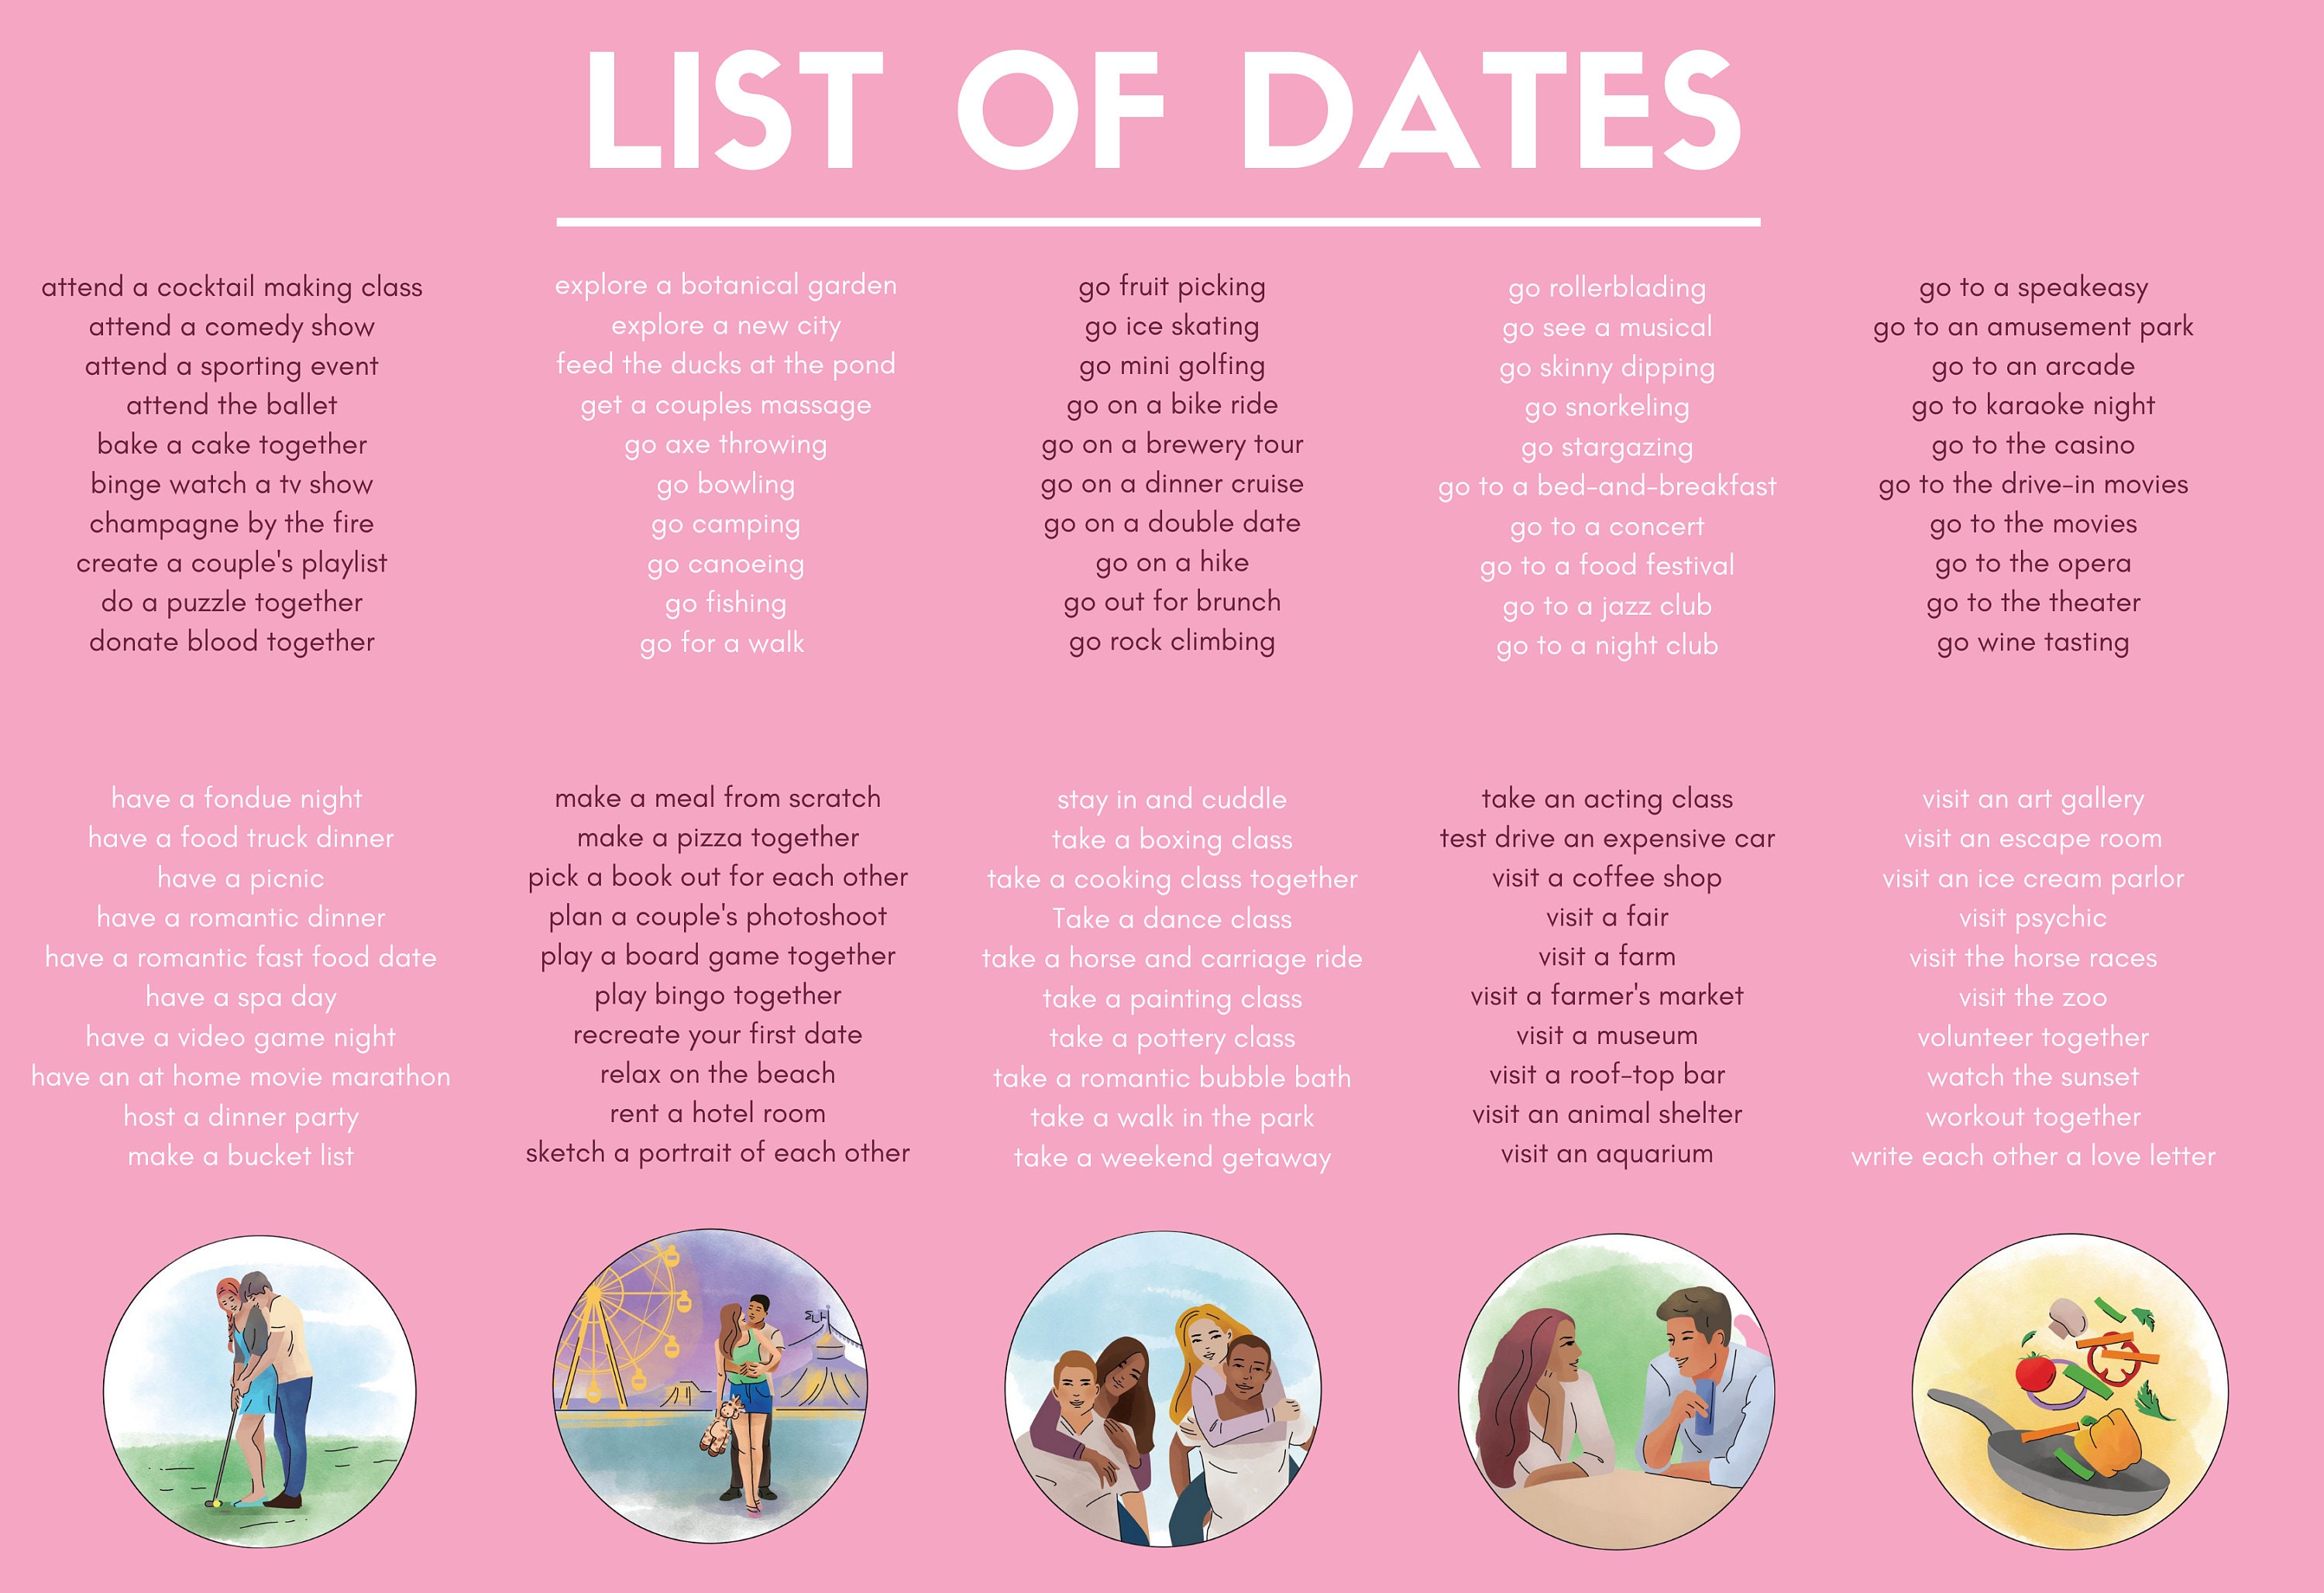 Keusn 100 Dates Ideas Scratch Off Poster Engagement Gifts for Her Date Night Anniversary for Couples Birthday Gifts for Women Wedding Gifts Matching